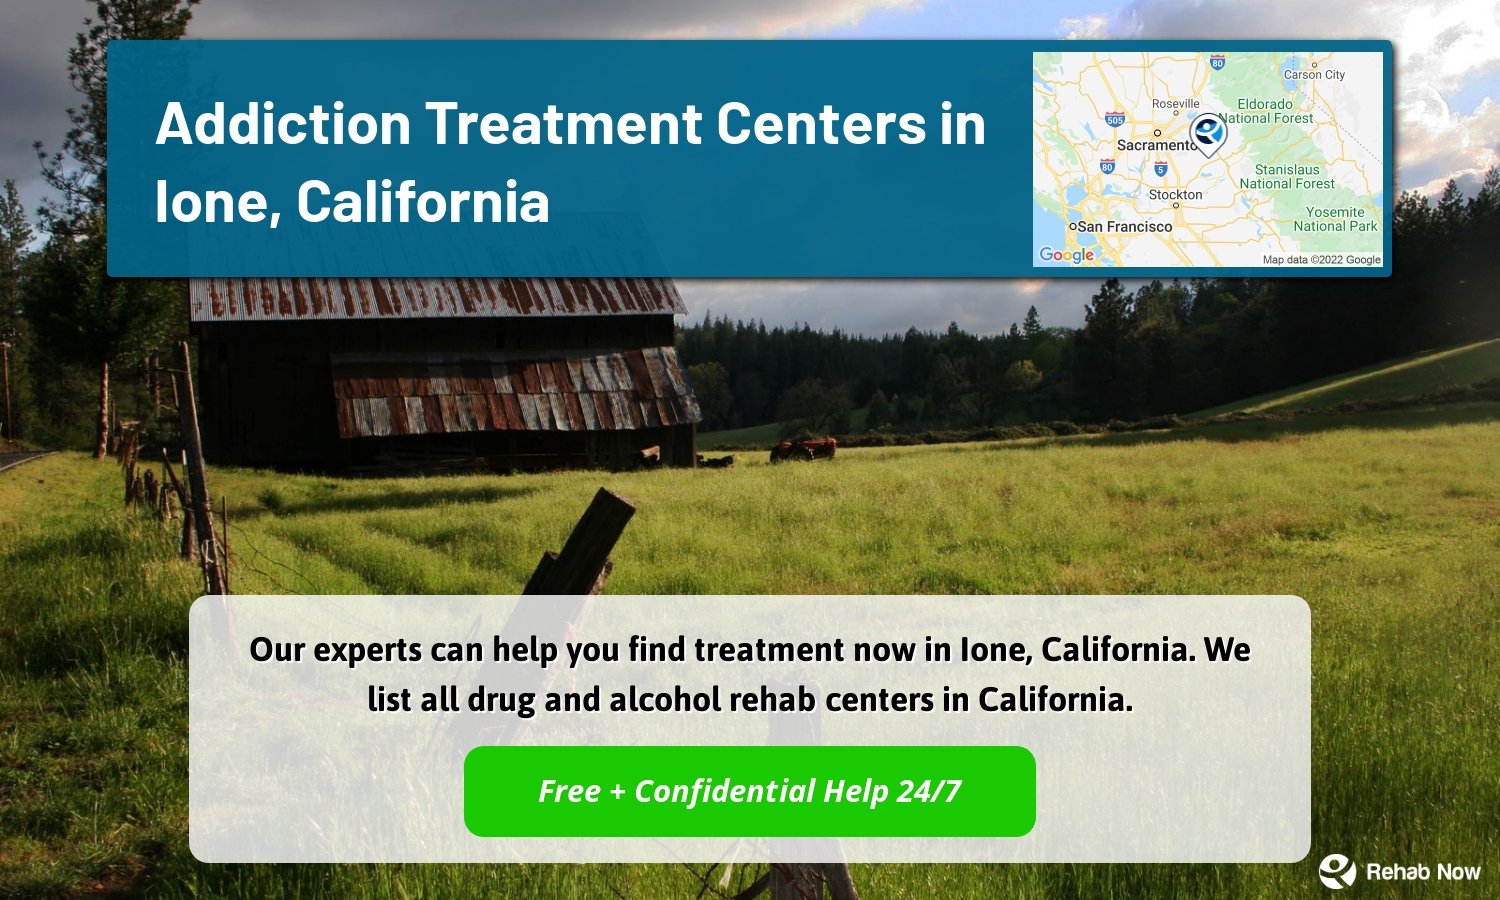 Our experts can help you find treatment now in Ione, California. We list all drug and alcohol rehab centers in California.